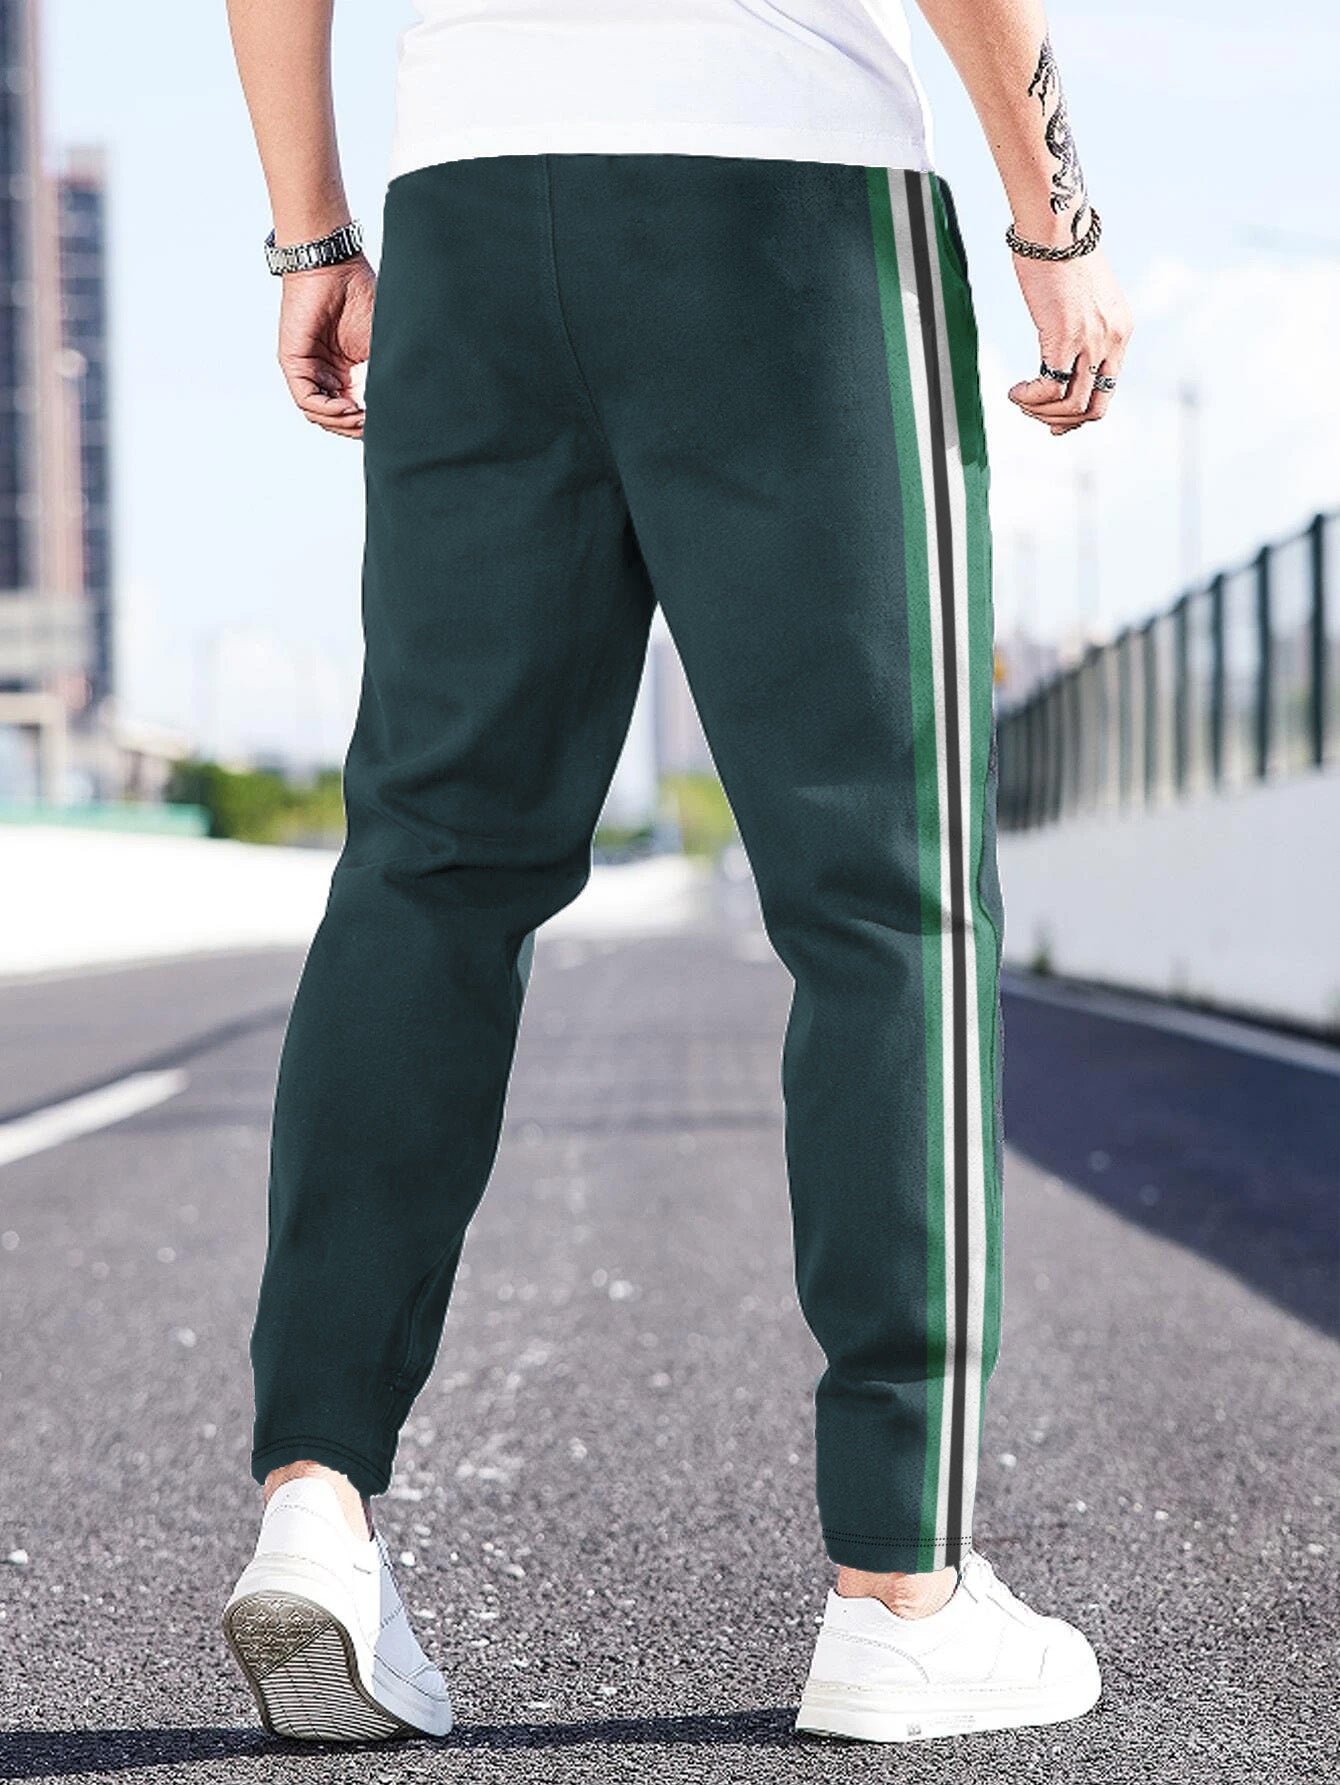 Louis Vicaci Slim Fit Summer Active Wear Trouser Pent For Men-Dark Slate Green with White & Green Stripe-BR706